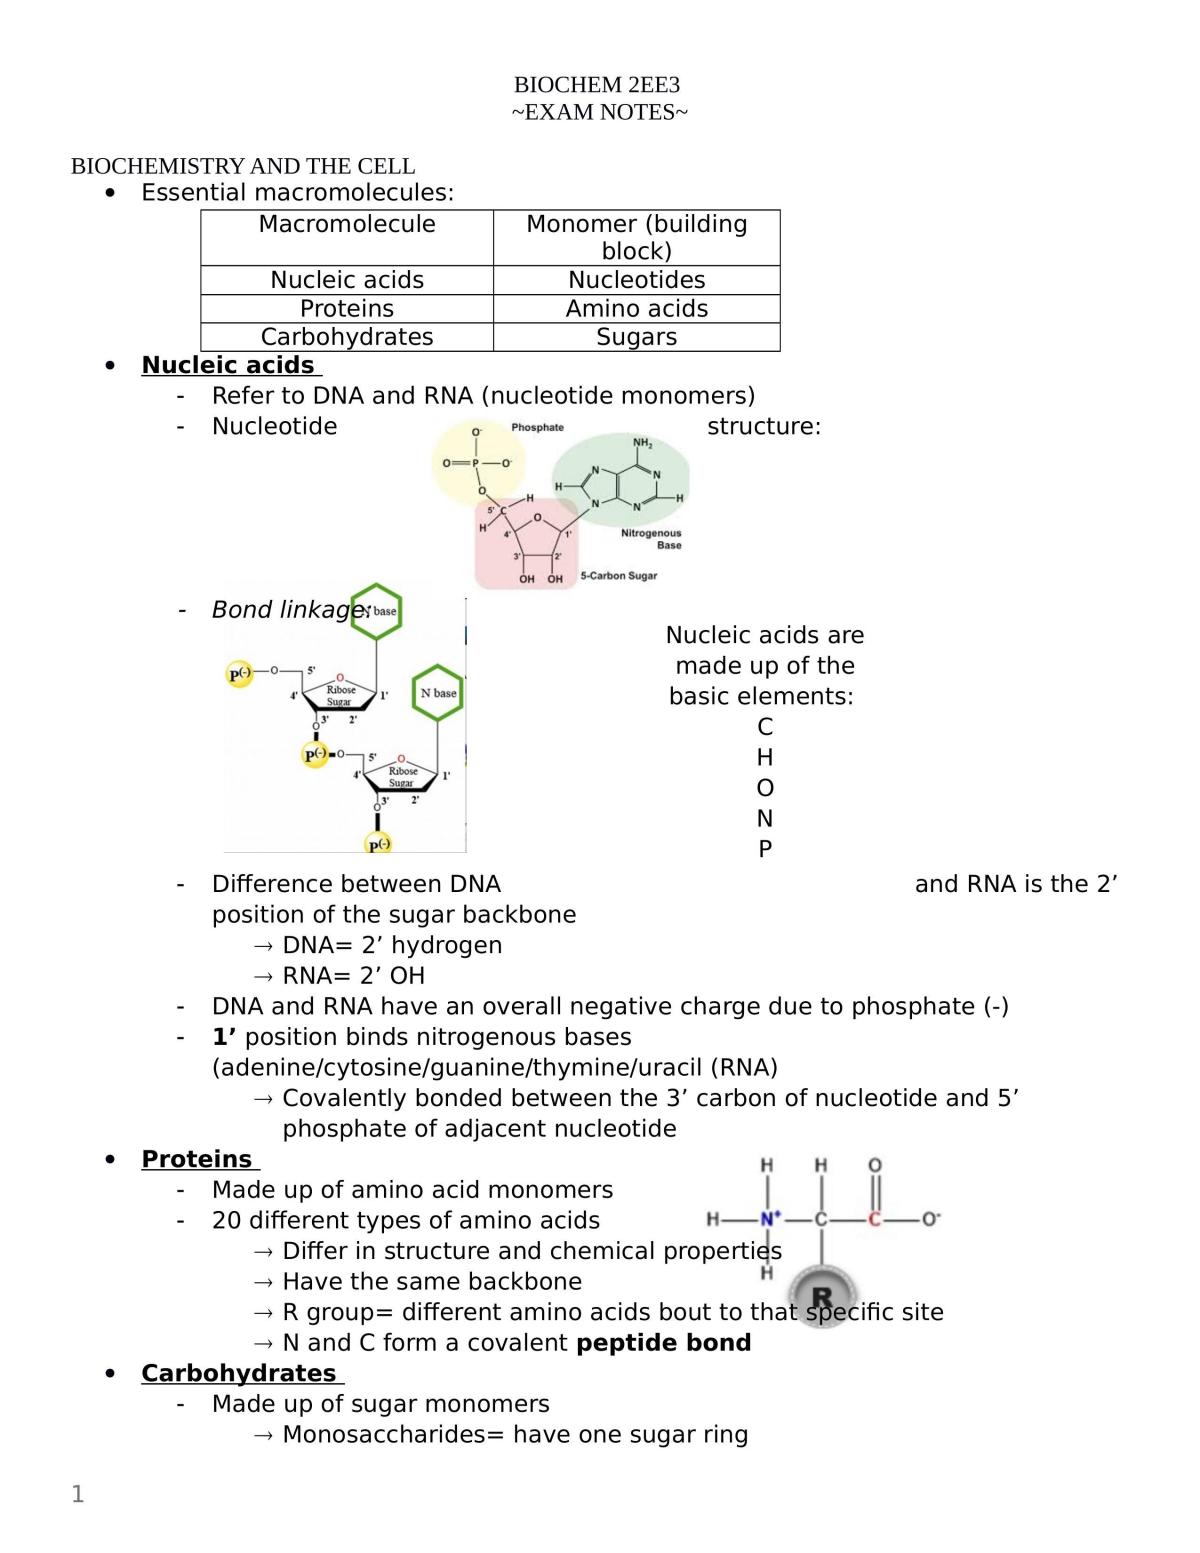 Complete Study Notes - Biochemistry - Page 1